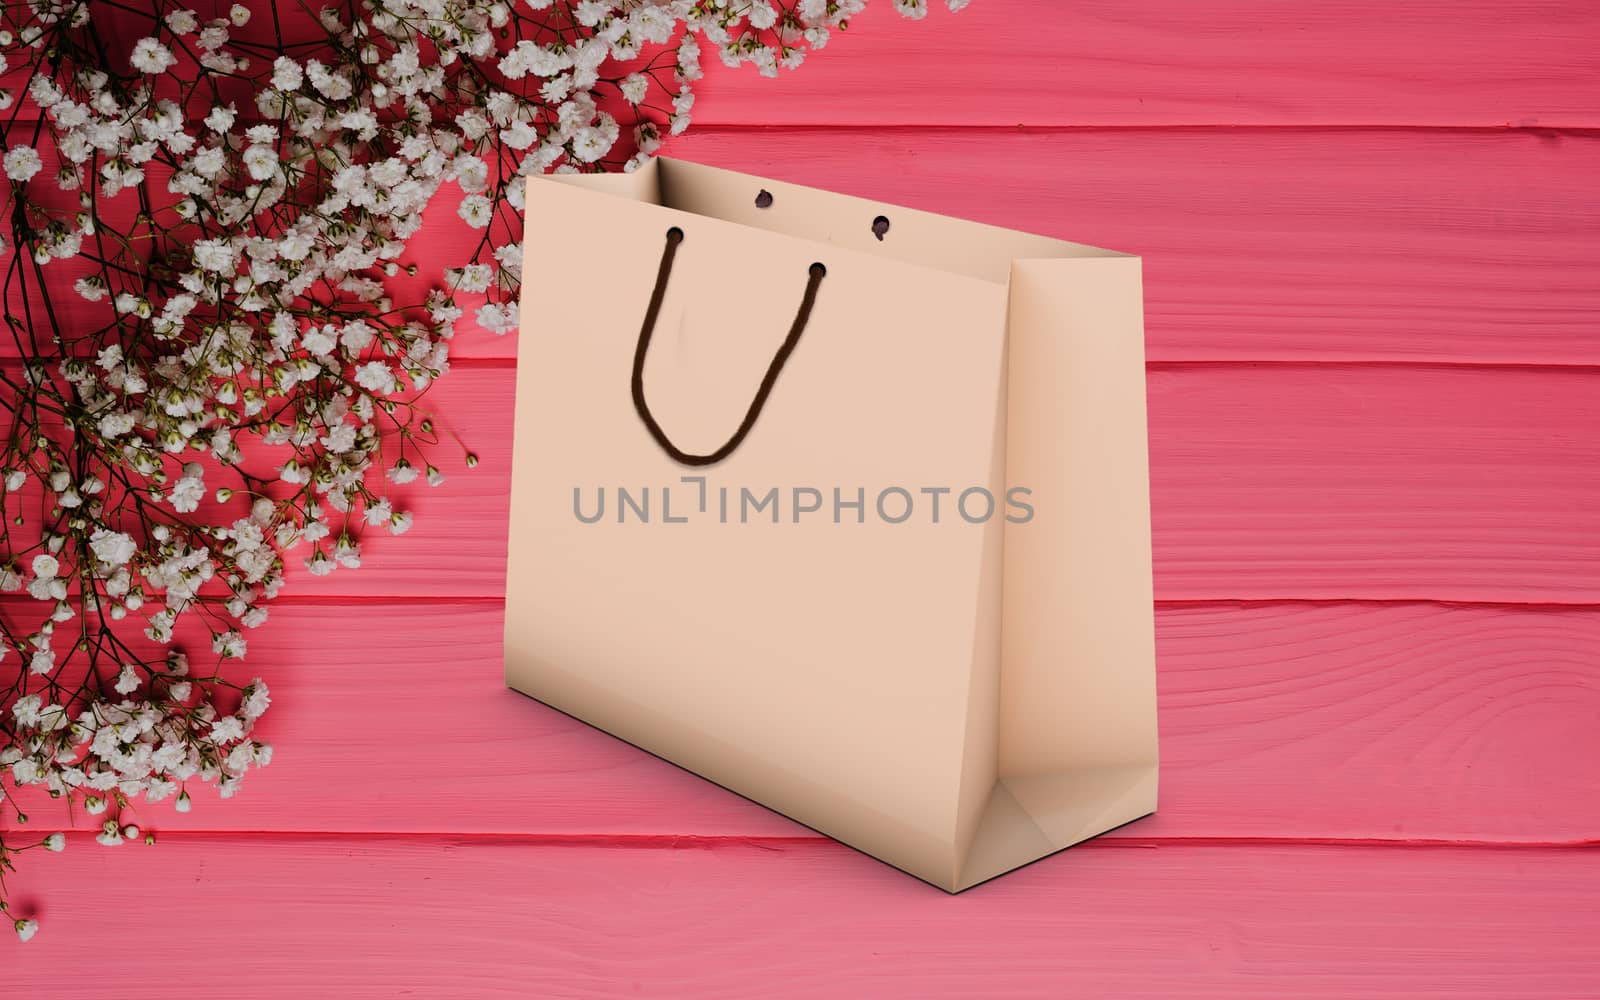 paper bag for shopping on a wooden pink background